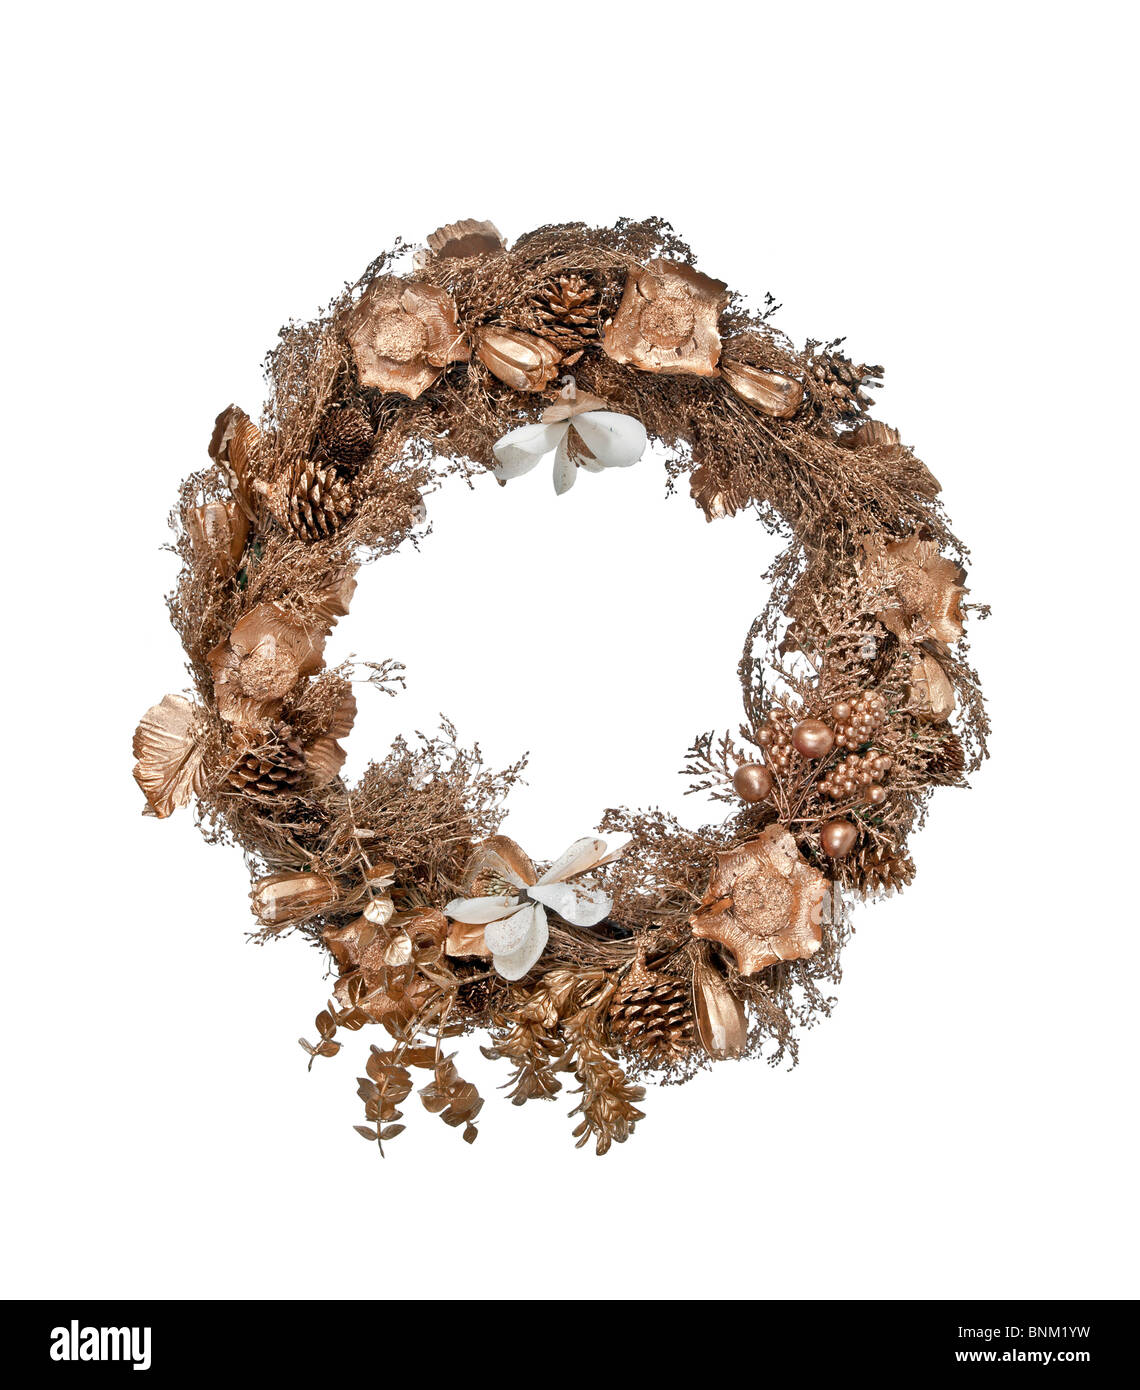 Decorative golden Christmas reef with woven natural materials. Stock Photo